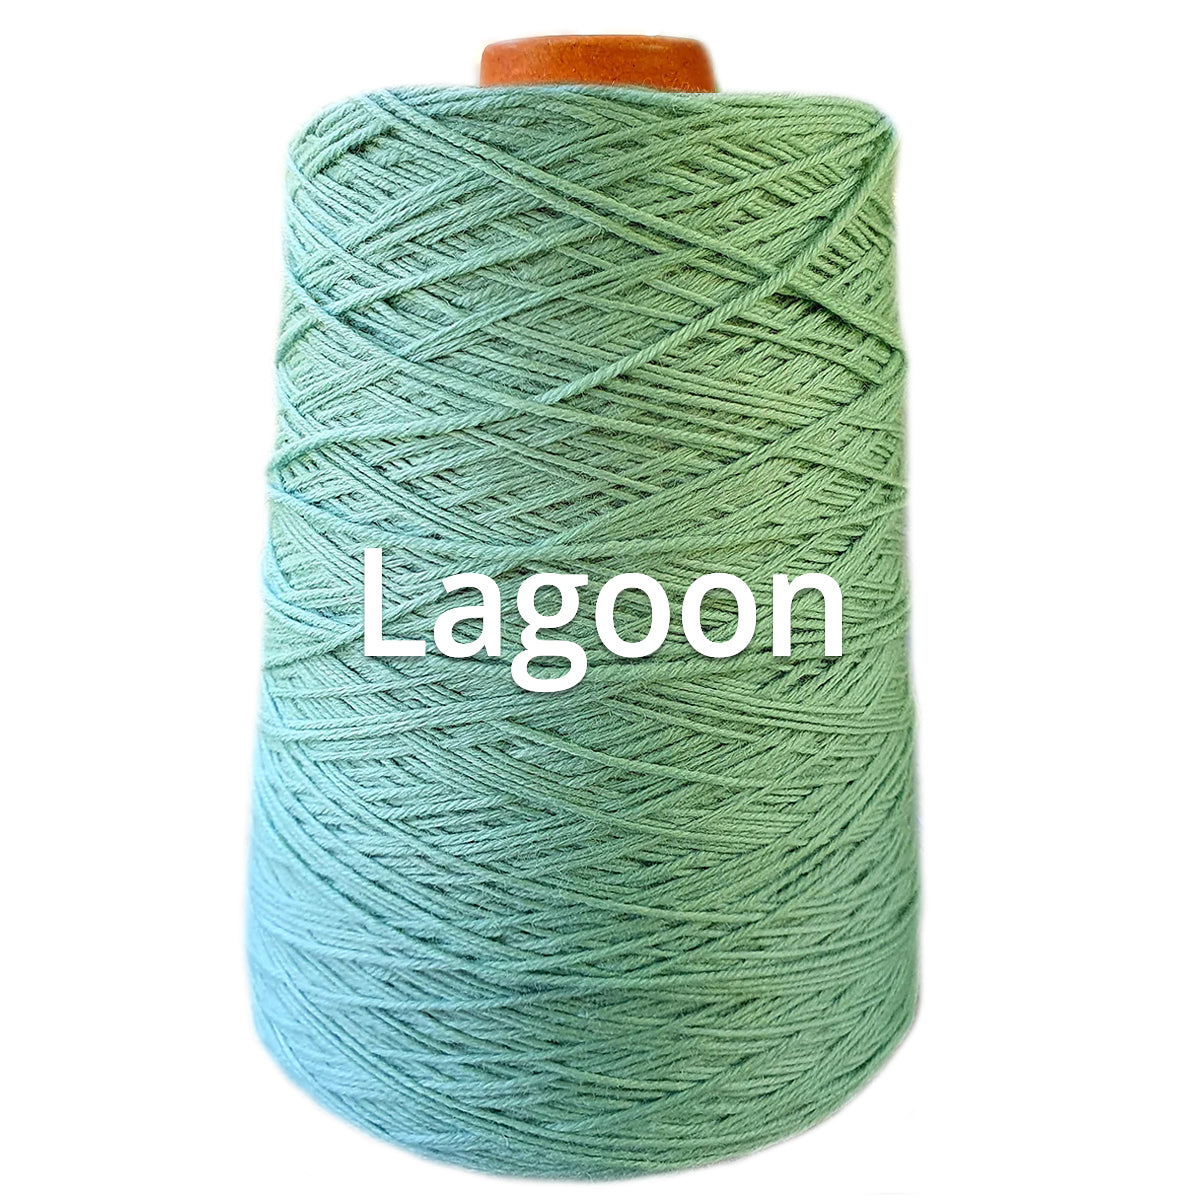 Lagoon - Nundle Collection - 4 Ply Sock Yarn 400g Cone